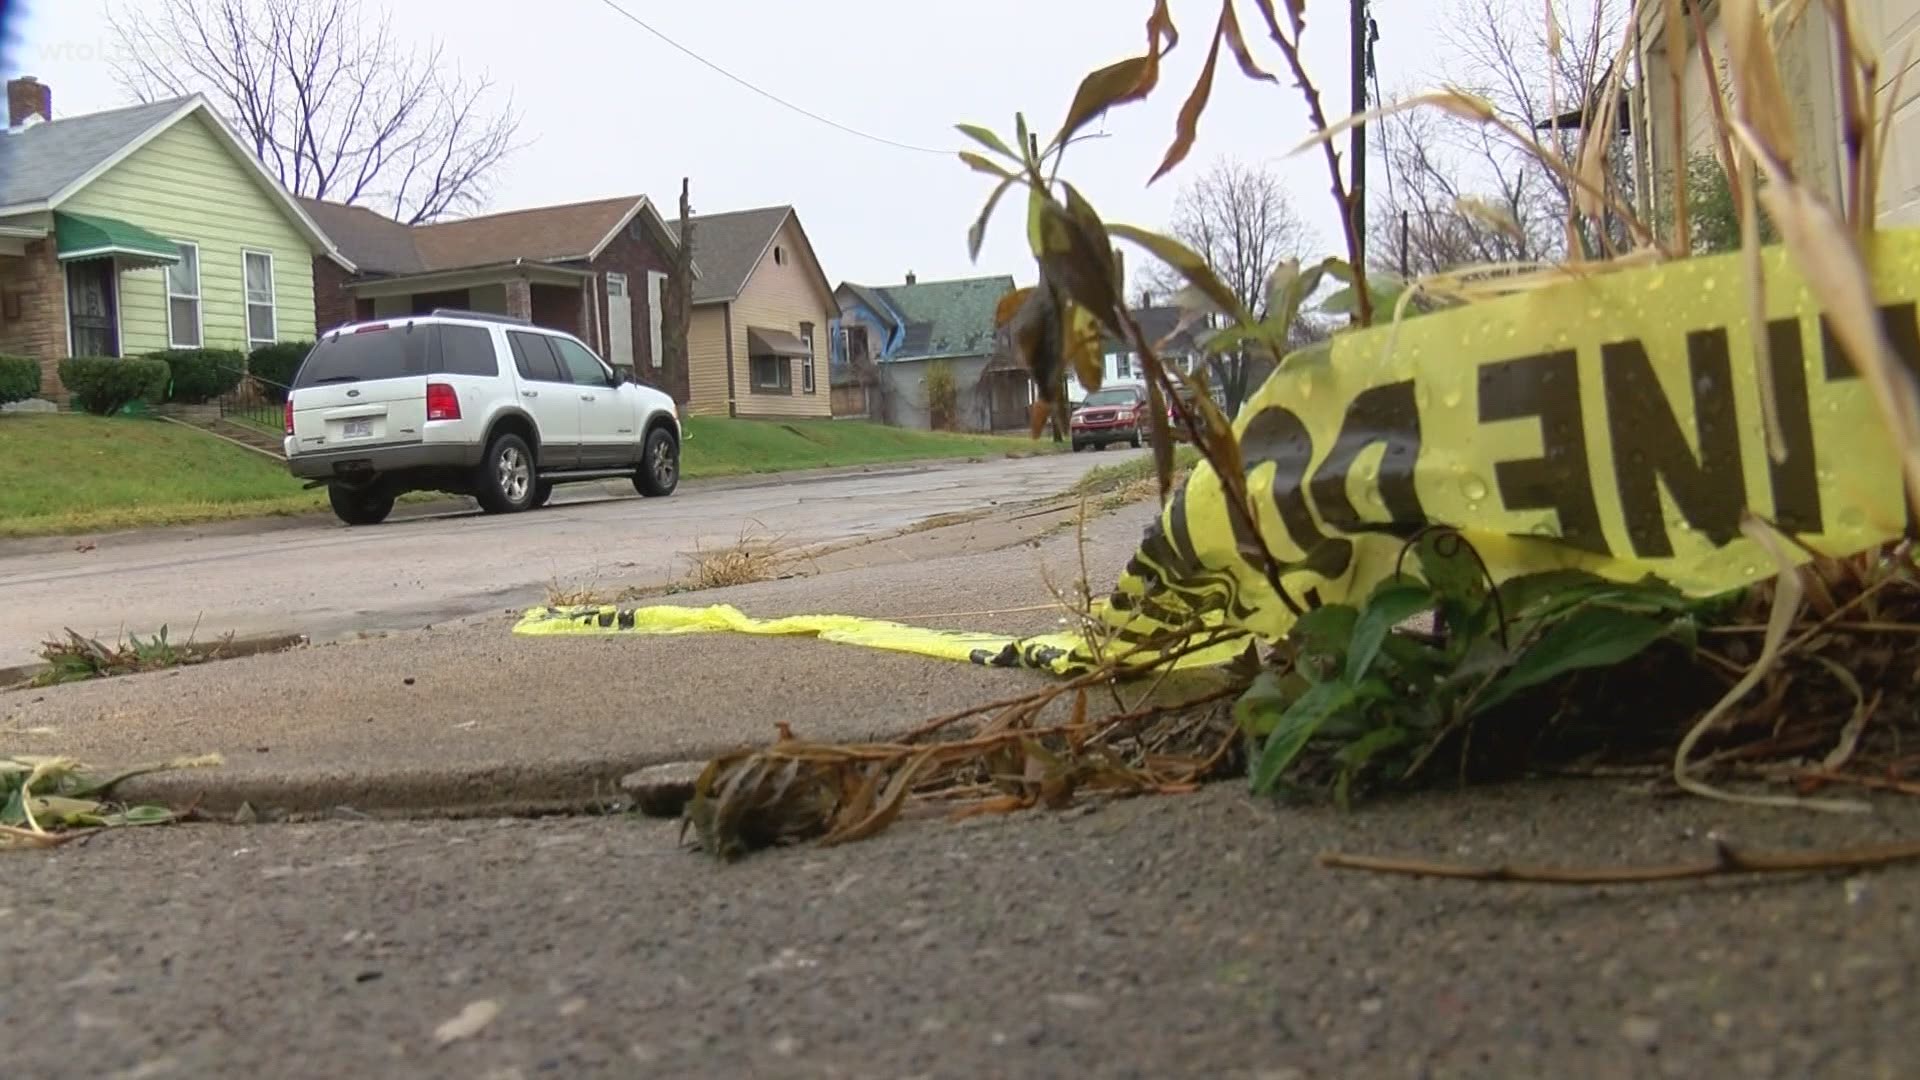 Toledo Police say the victim was found on Blum St. in south Toledo on Saturday evening.